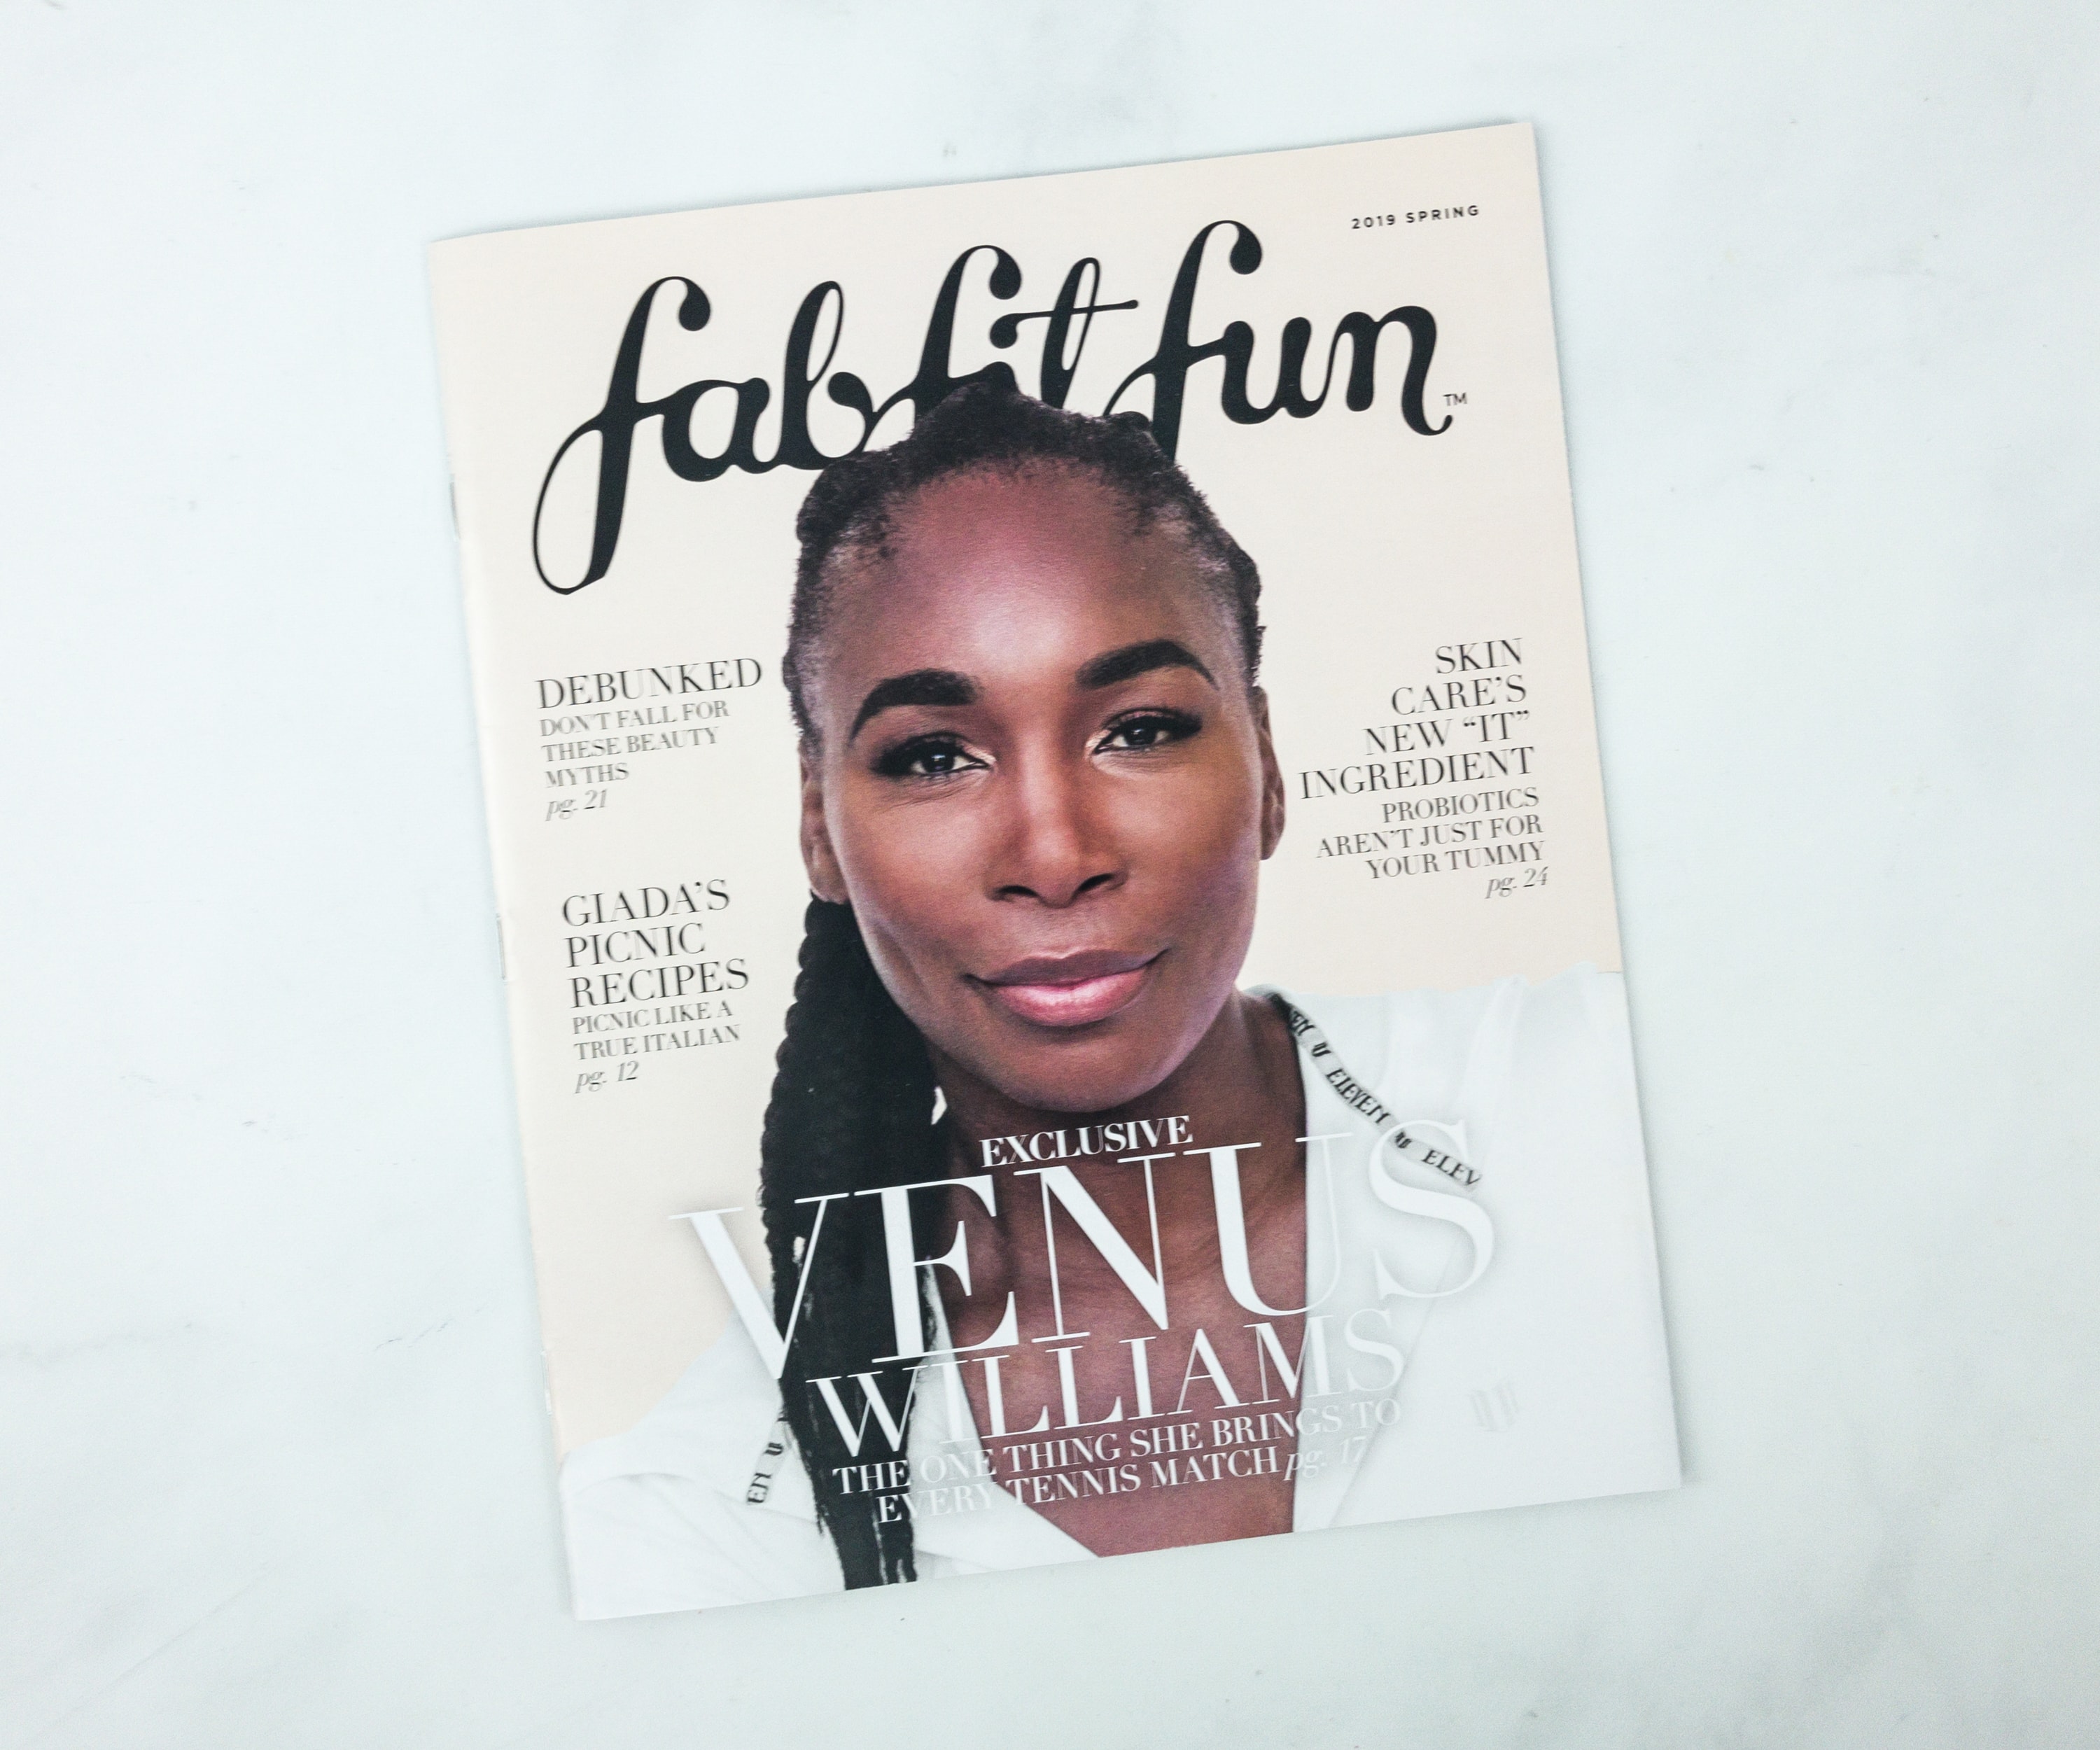 IS THE FABFITFUN BOX WORTH IT? SPRING 2019 REVIEW - The Katherine